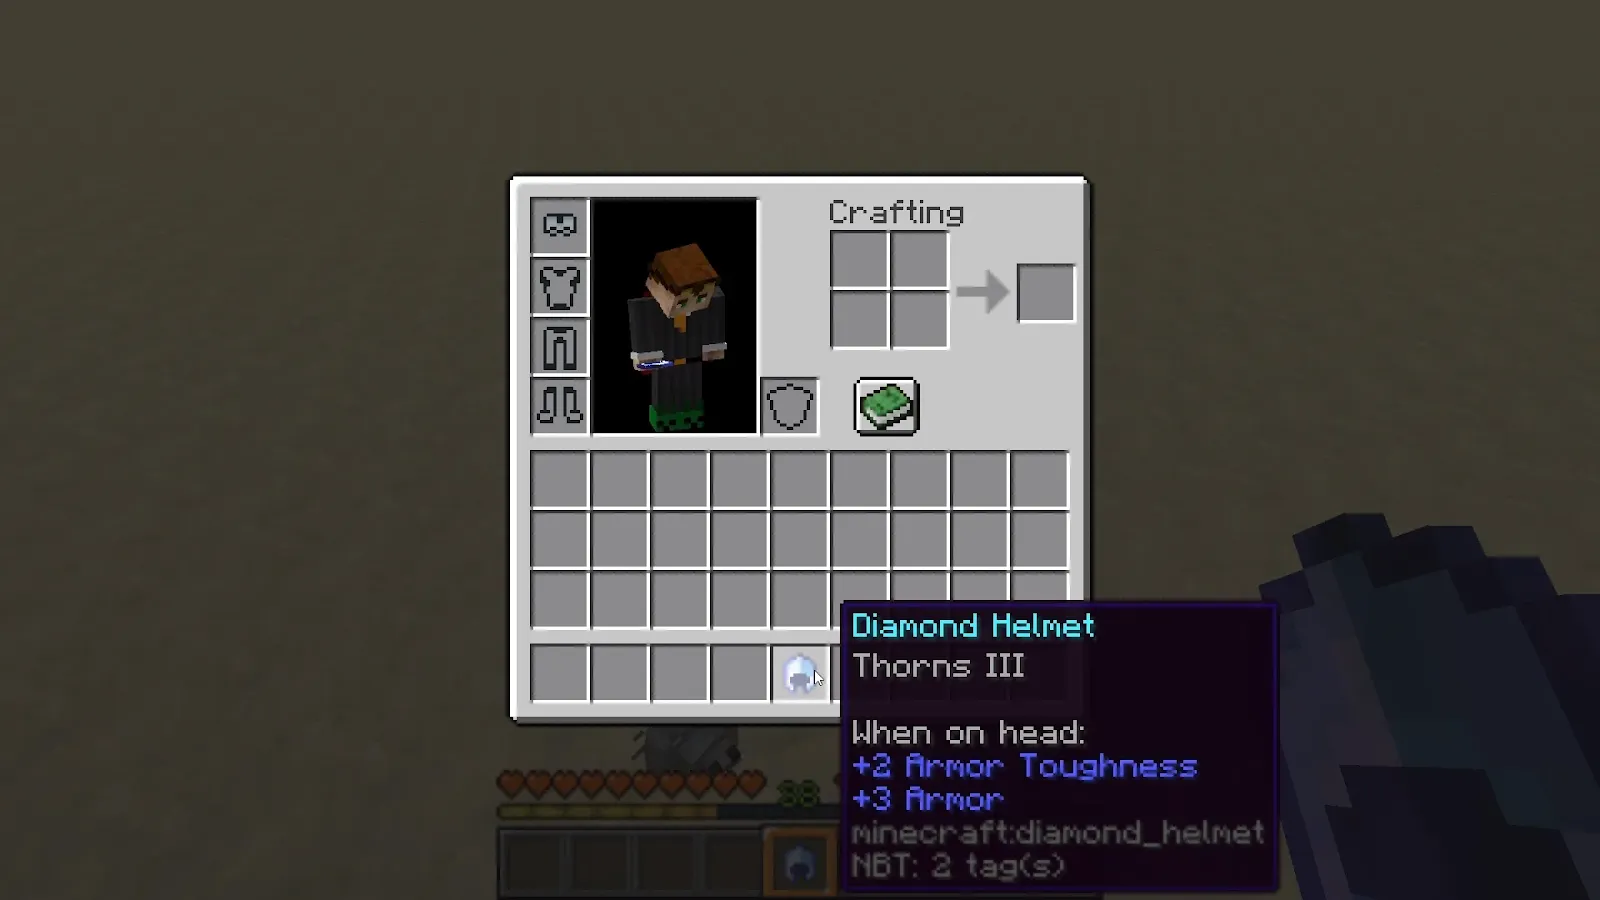 An image showing a diamond helmet with the thorns enchantment in Minecraft